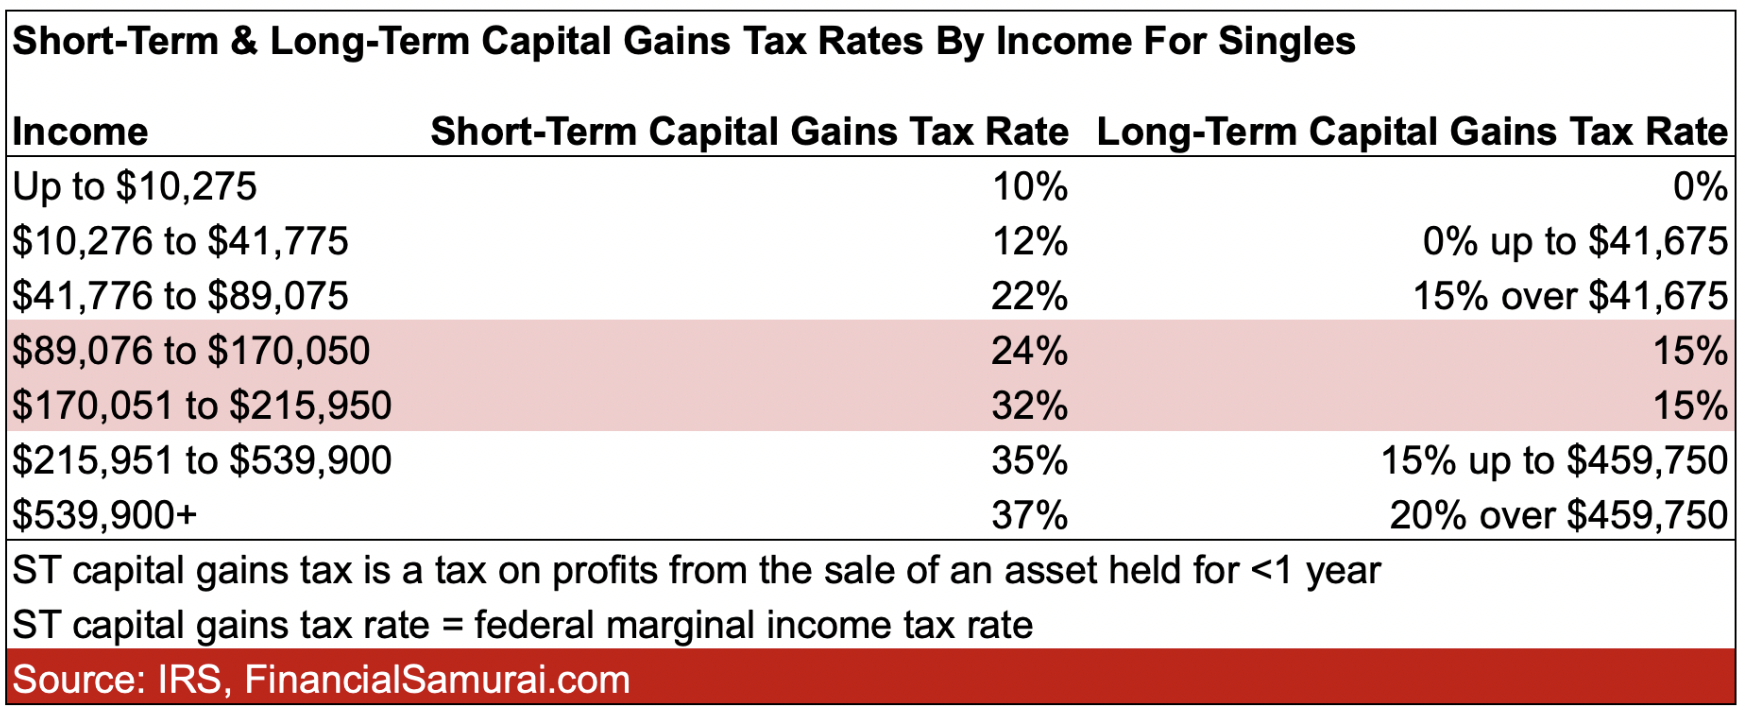 2022 Short-term and Long-term capital gains tax rates for singles